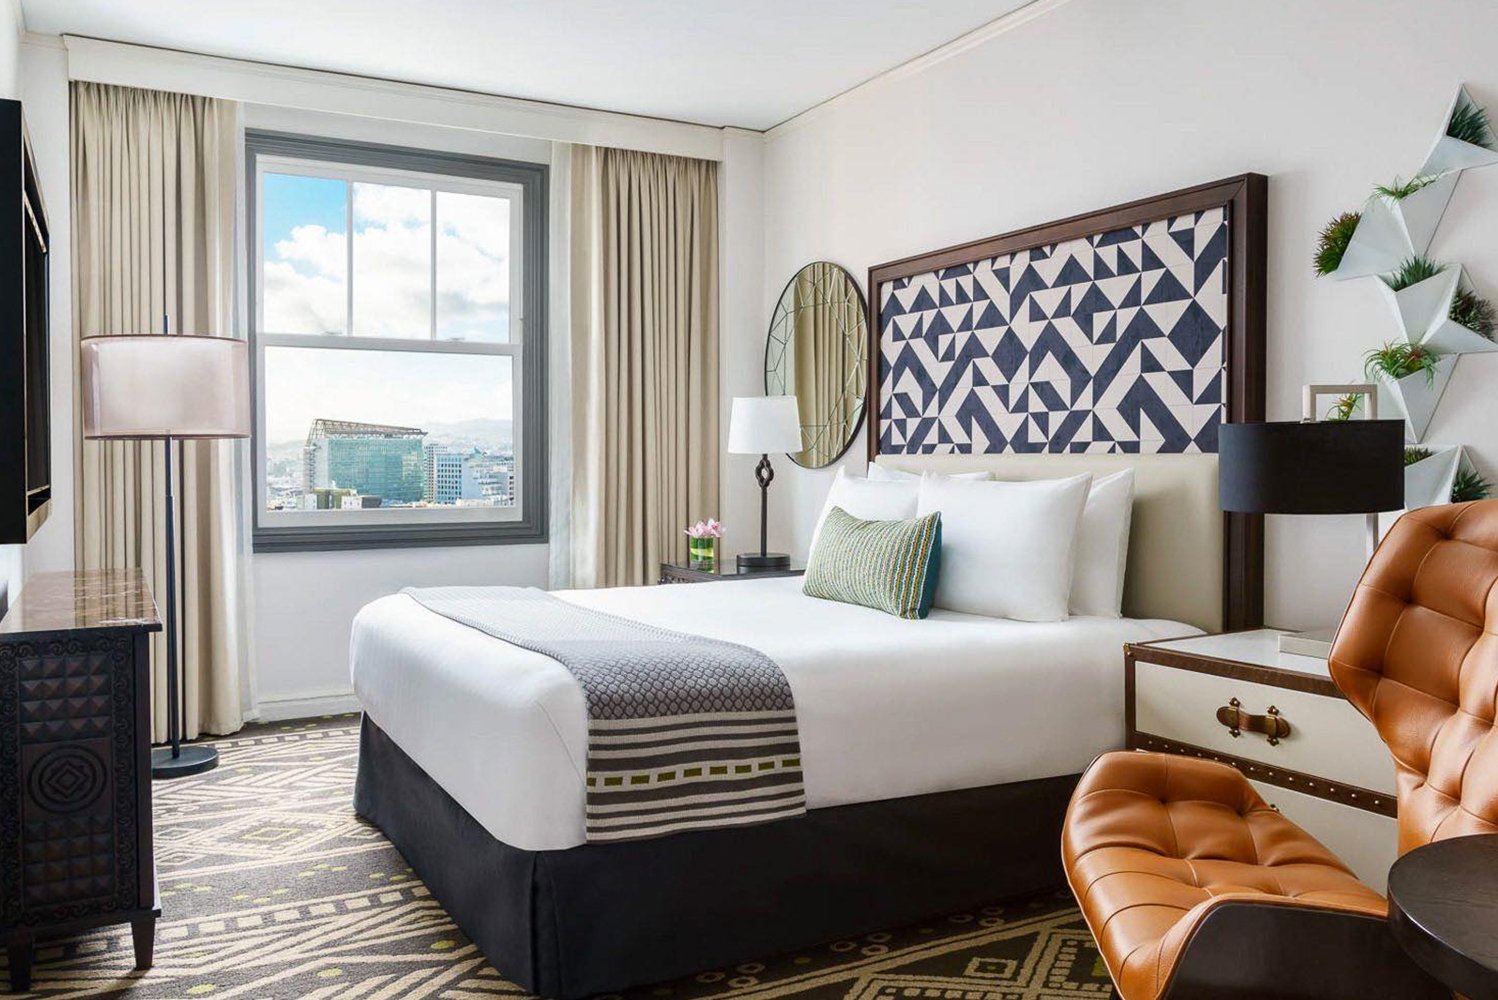 San Franciscos Serrano Hotel is undergoing a 16 million renovation that  upon completion this April  will see the p